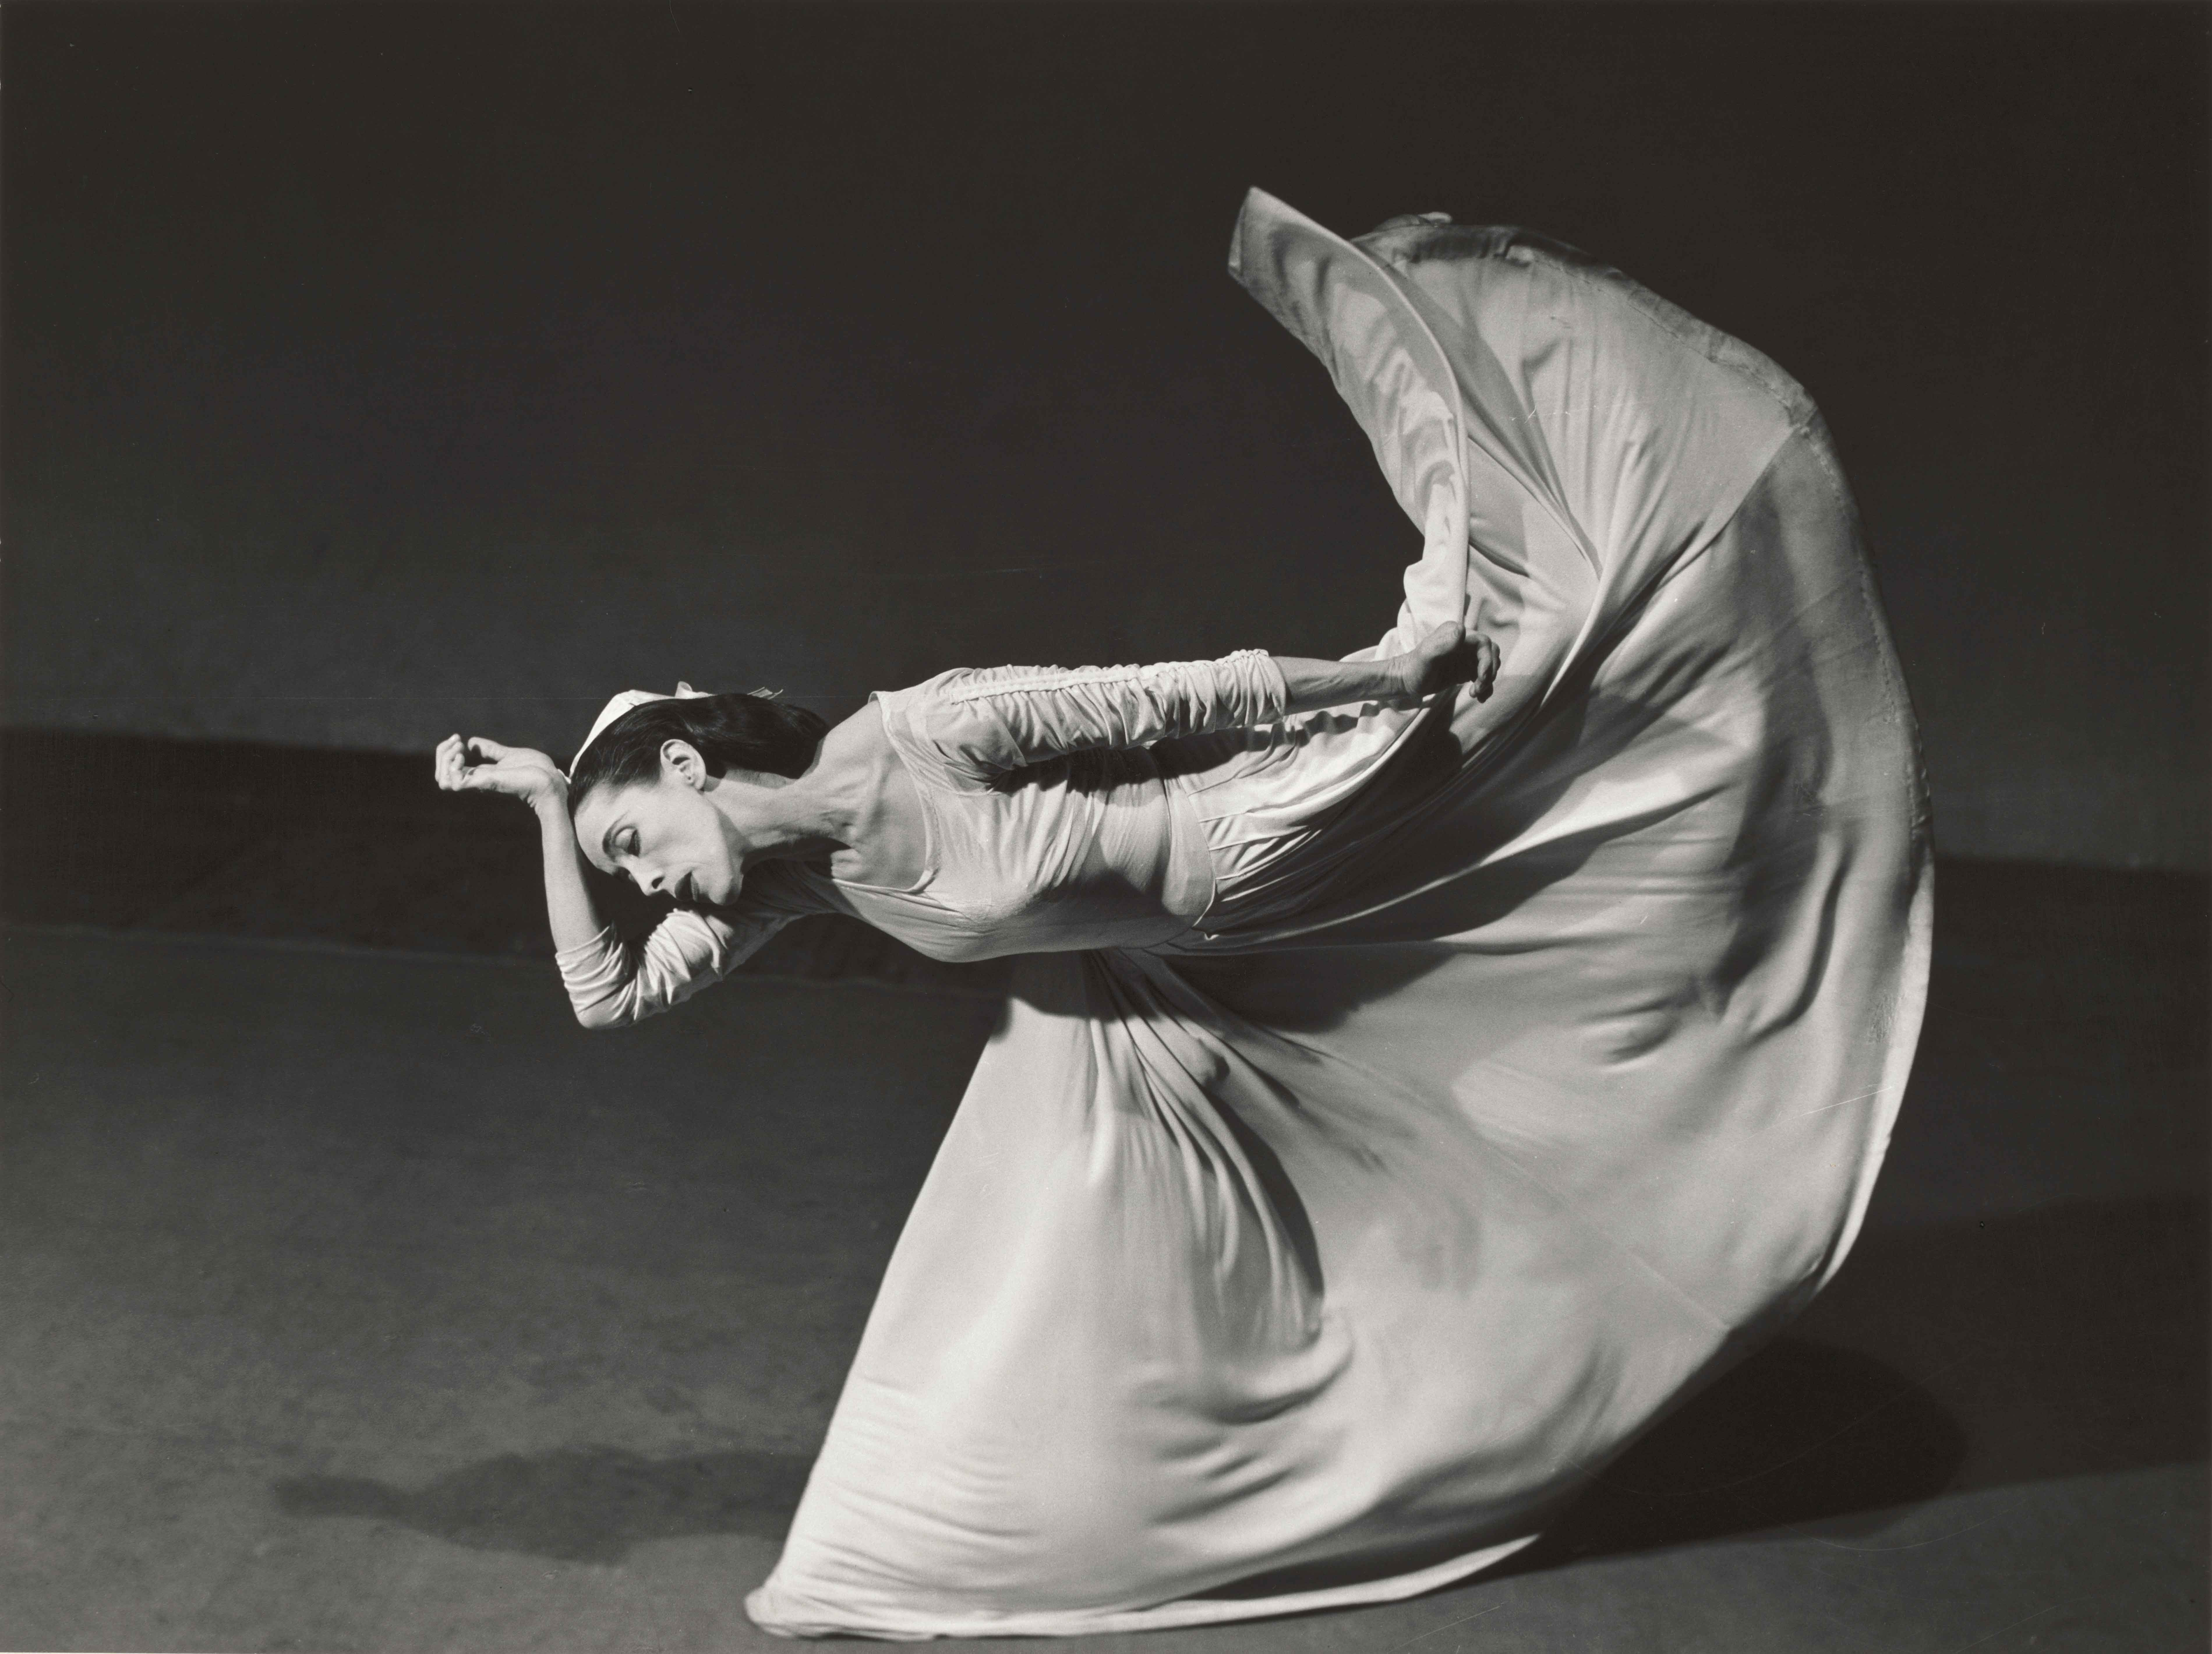 Barbara Morgan (American, 1900–1992), Martha Graham in Letter to the World, 1940, gelatin silver print. Bank of America Collection. Barbara and Willard Morgan photographs and papers, UCLA Library Special Collections. Choreography by Martha Graham, Courtesy of Martha Graham Resources